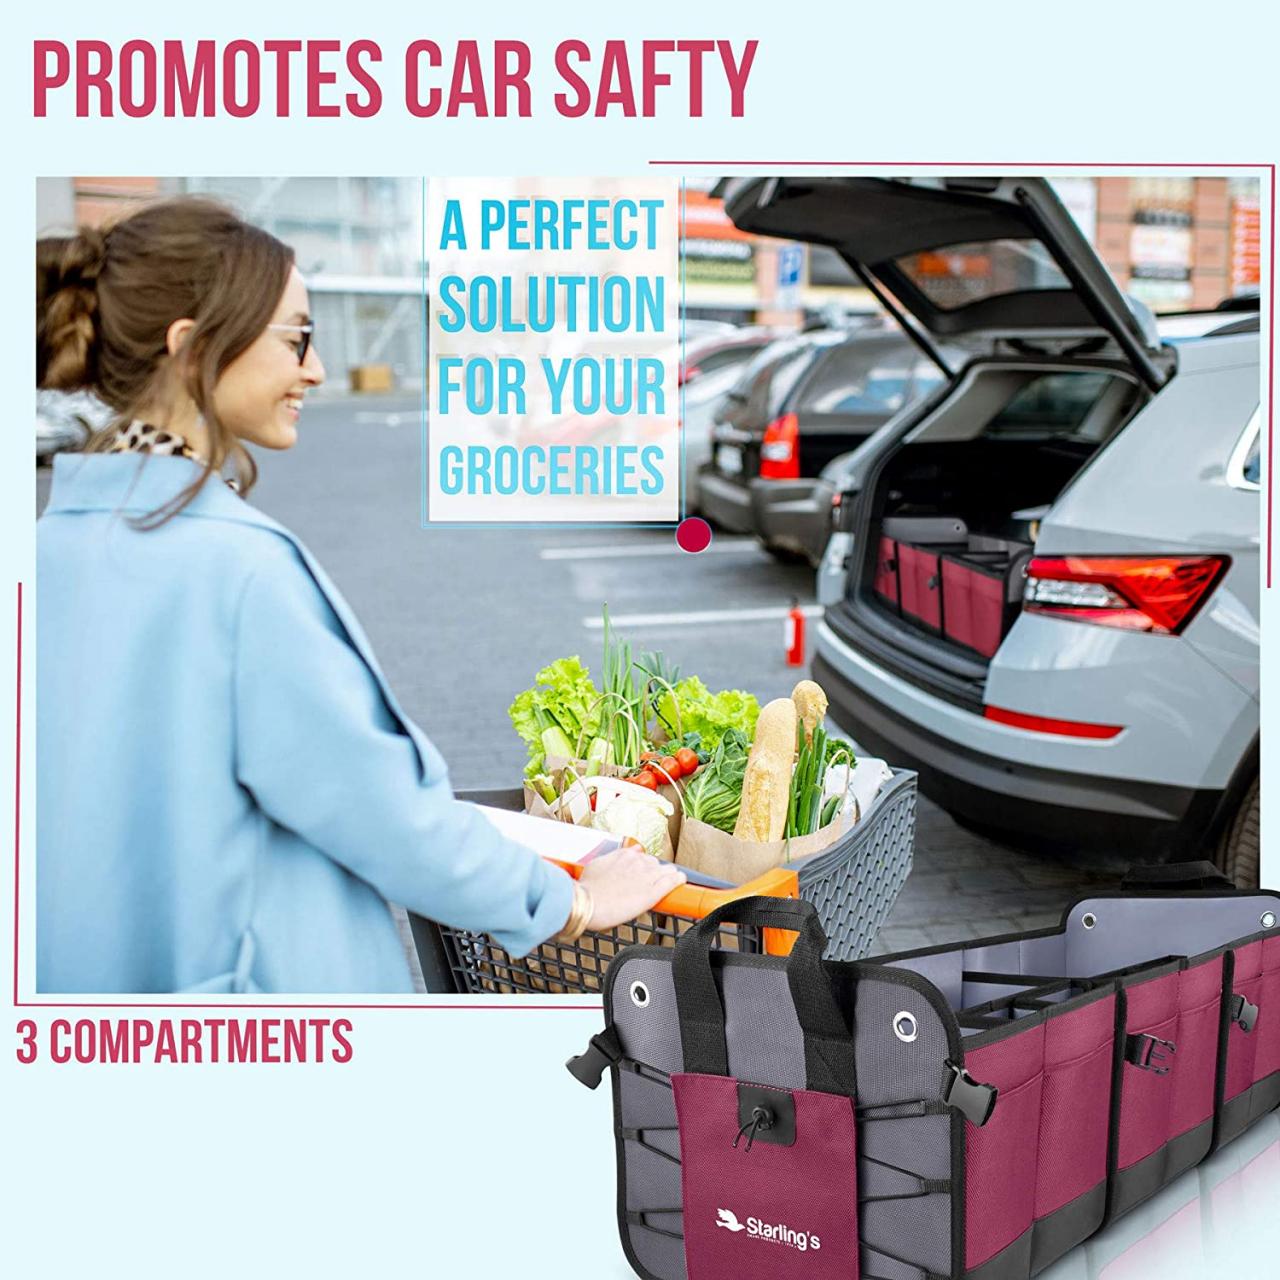 Buy Starling's Car Trunk Organizer - Durable Storage SUV Cargo Organizer  Adjustable (Bordeaux, 3 Compartments) Online in Hong Kong. B07RTWFWZP